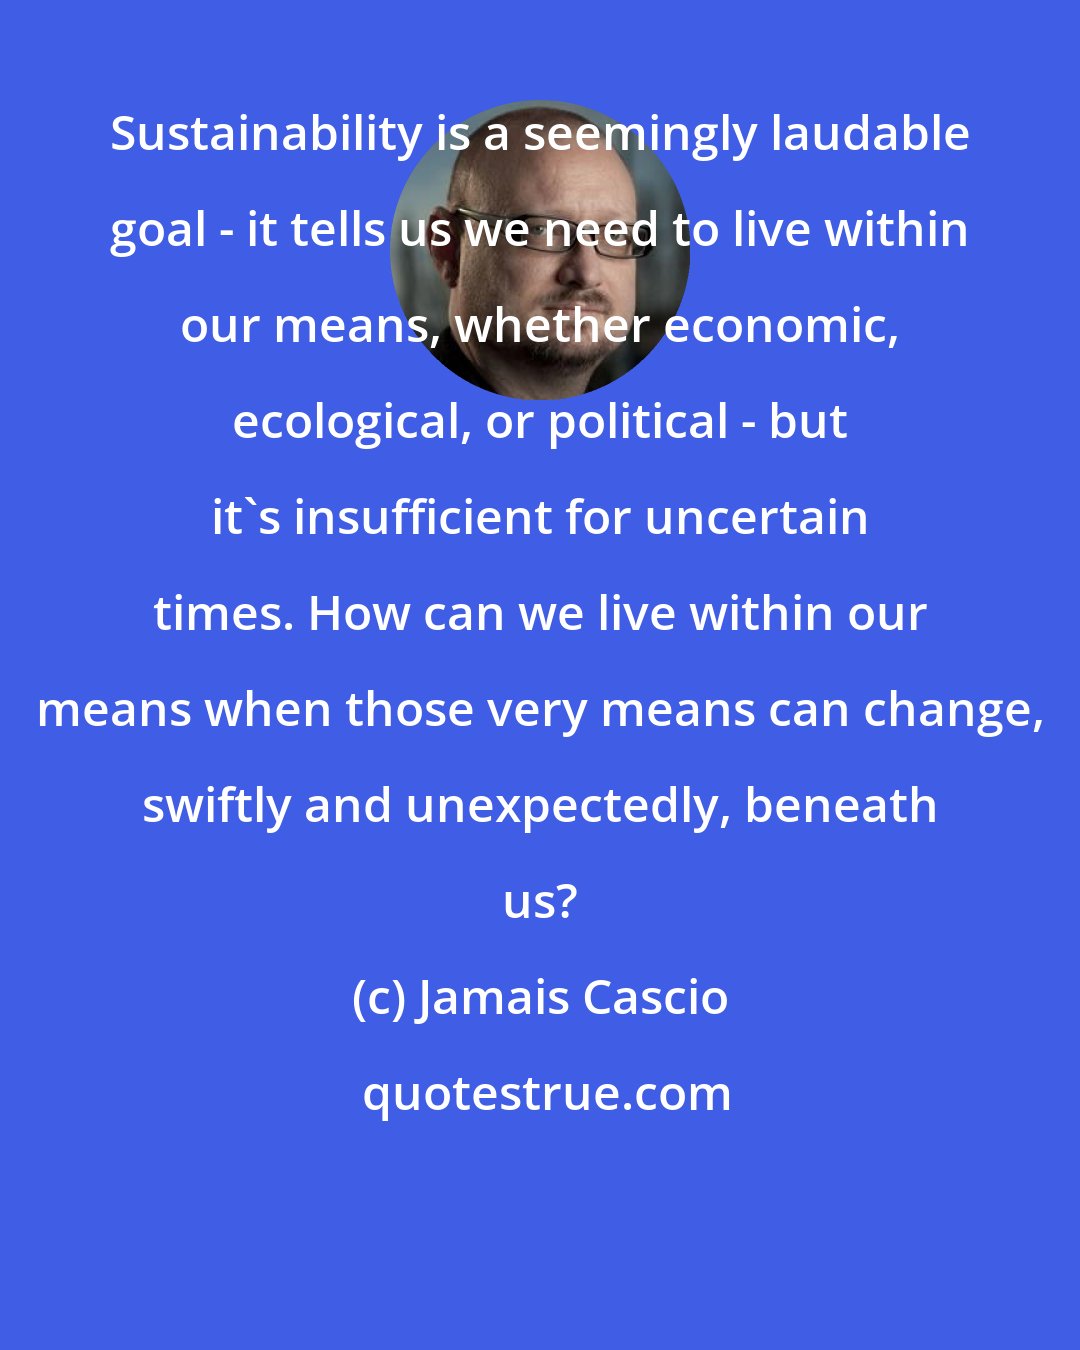 Jamais Cascio: Sustainability is a seemingly laudable goal - it tells us we need to live within our means, whether economic, ecological, or political - but it's insufficient for uncertain times. How can we live within our means when those very means can change, swiftly and unexpectedly, beneath us?